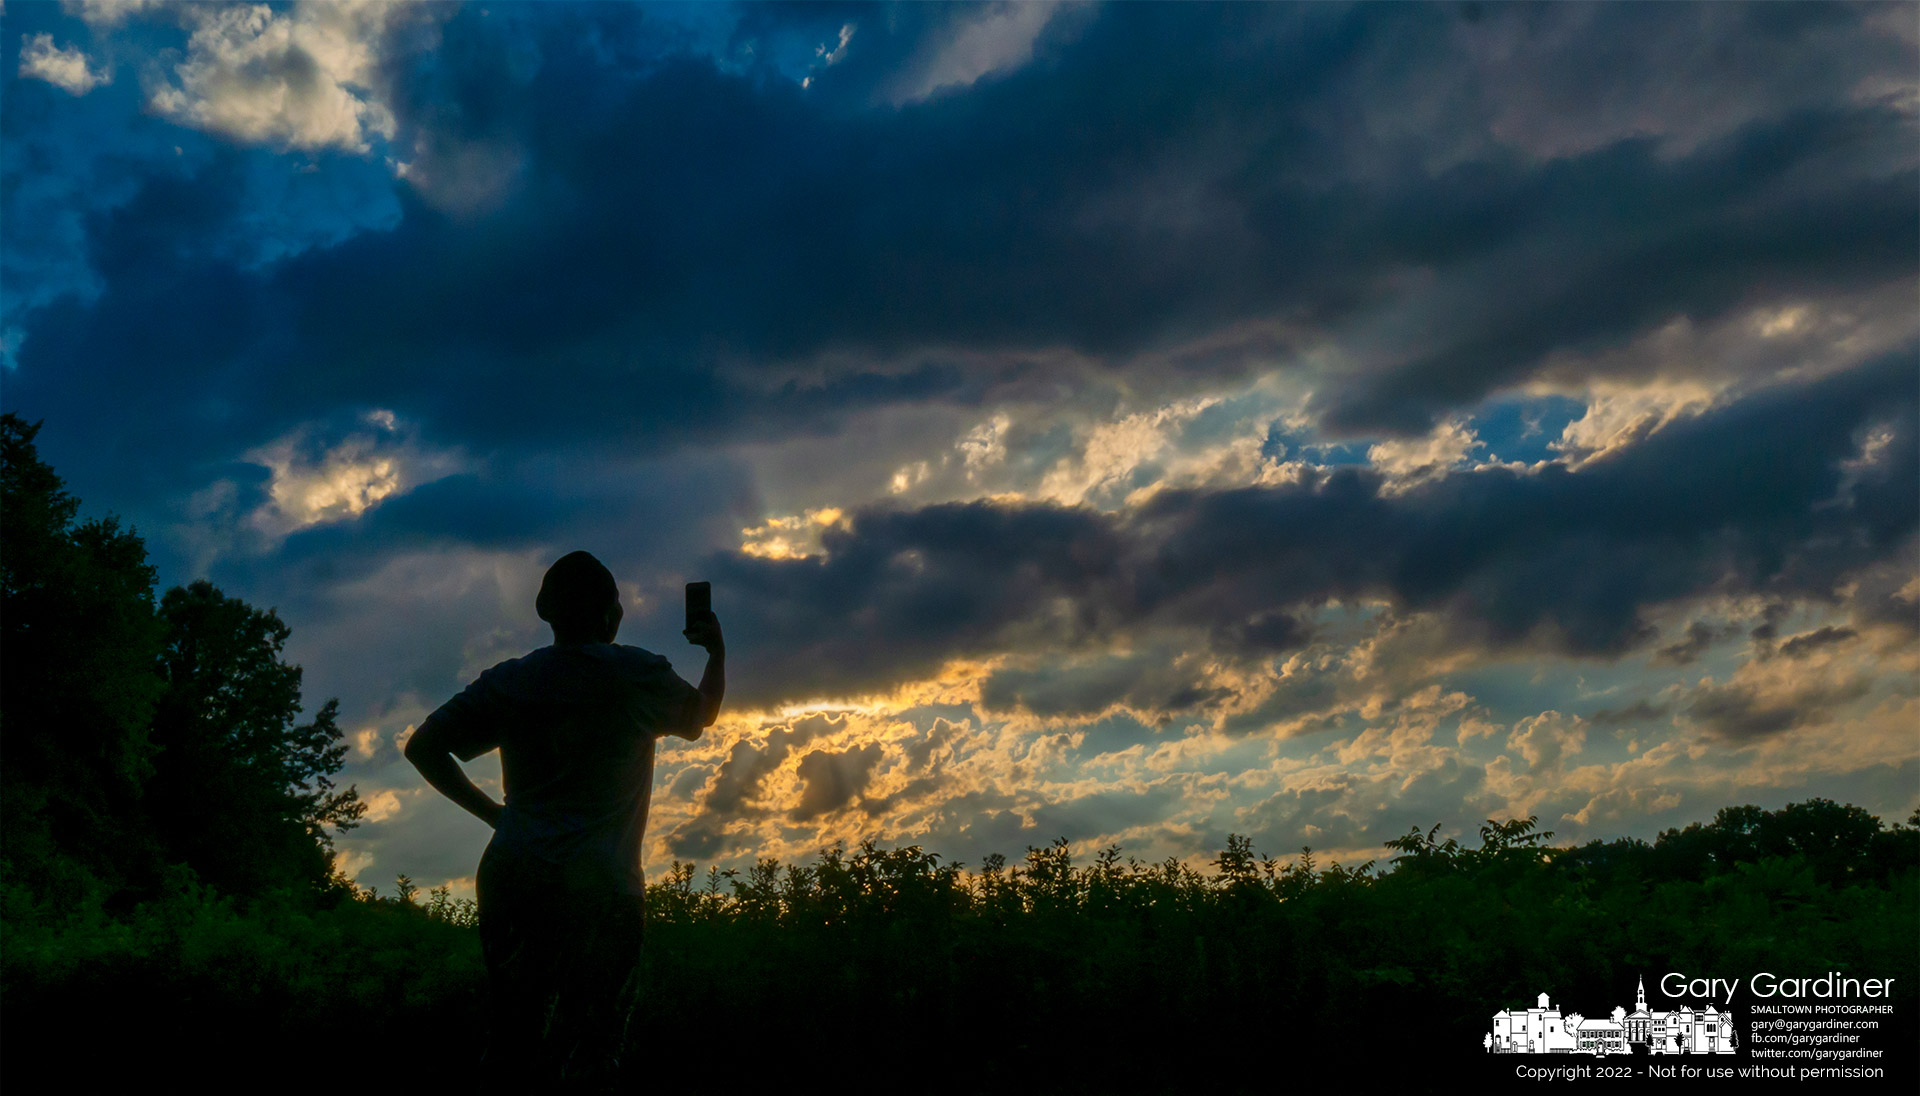 A music minister sings into her phone as she records the sunset over the prairie at Sharon Woods Metro Park. My Final Photo for July 29, 2022.